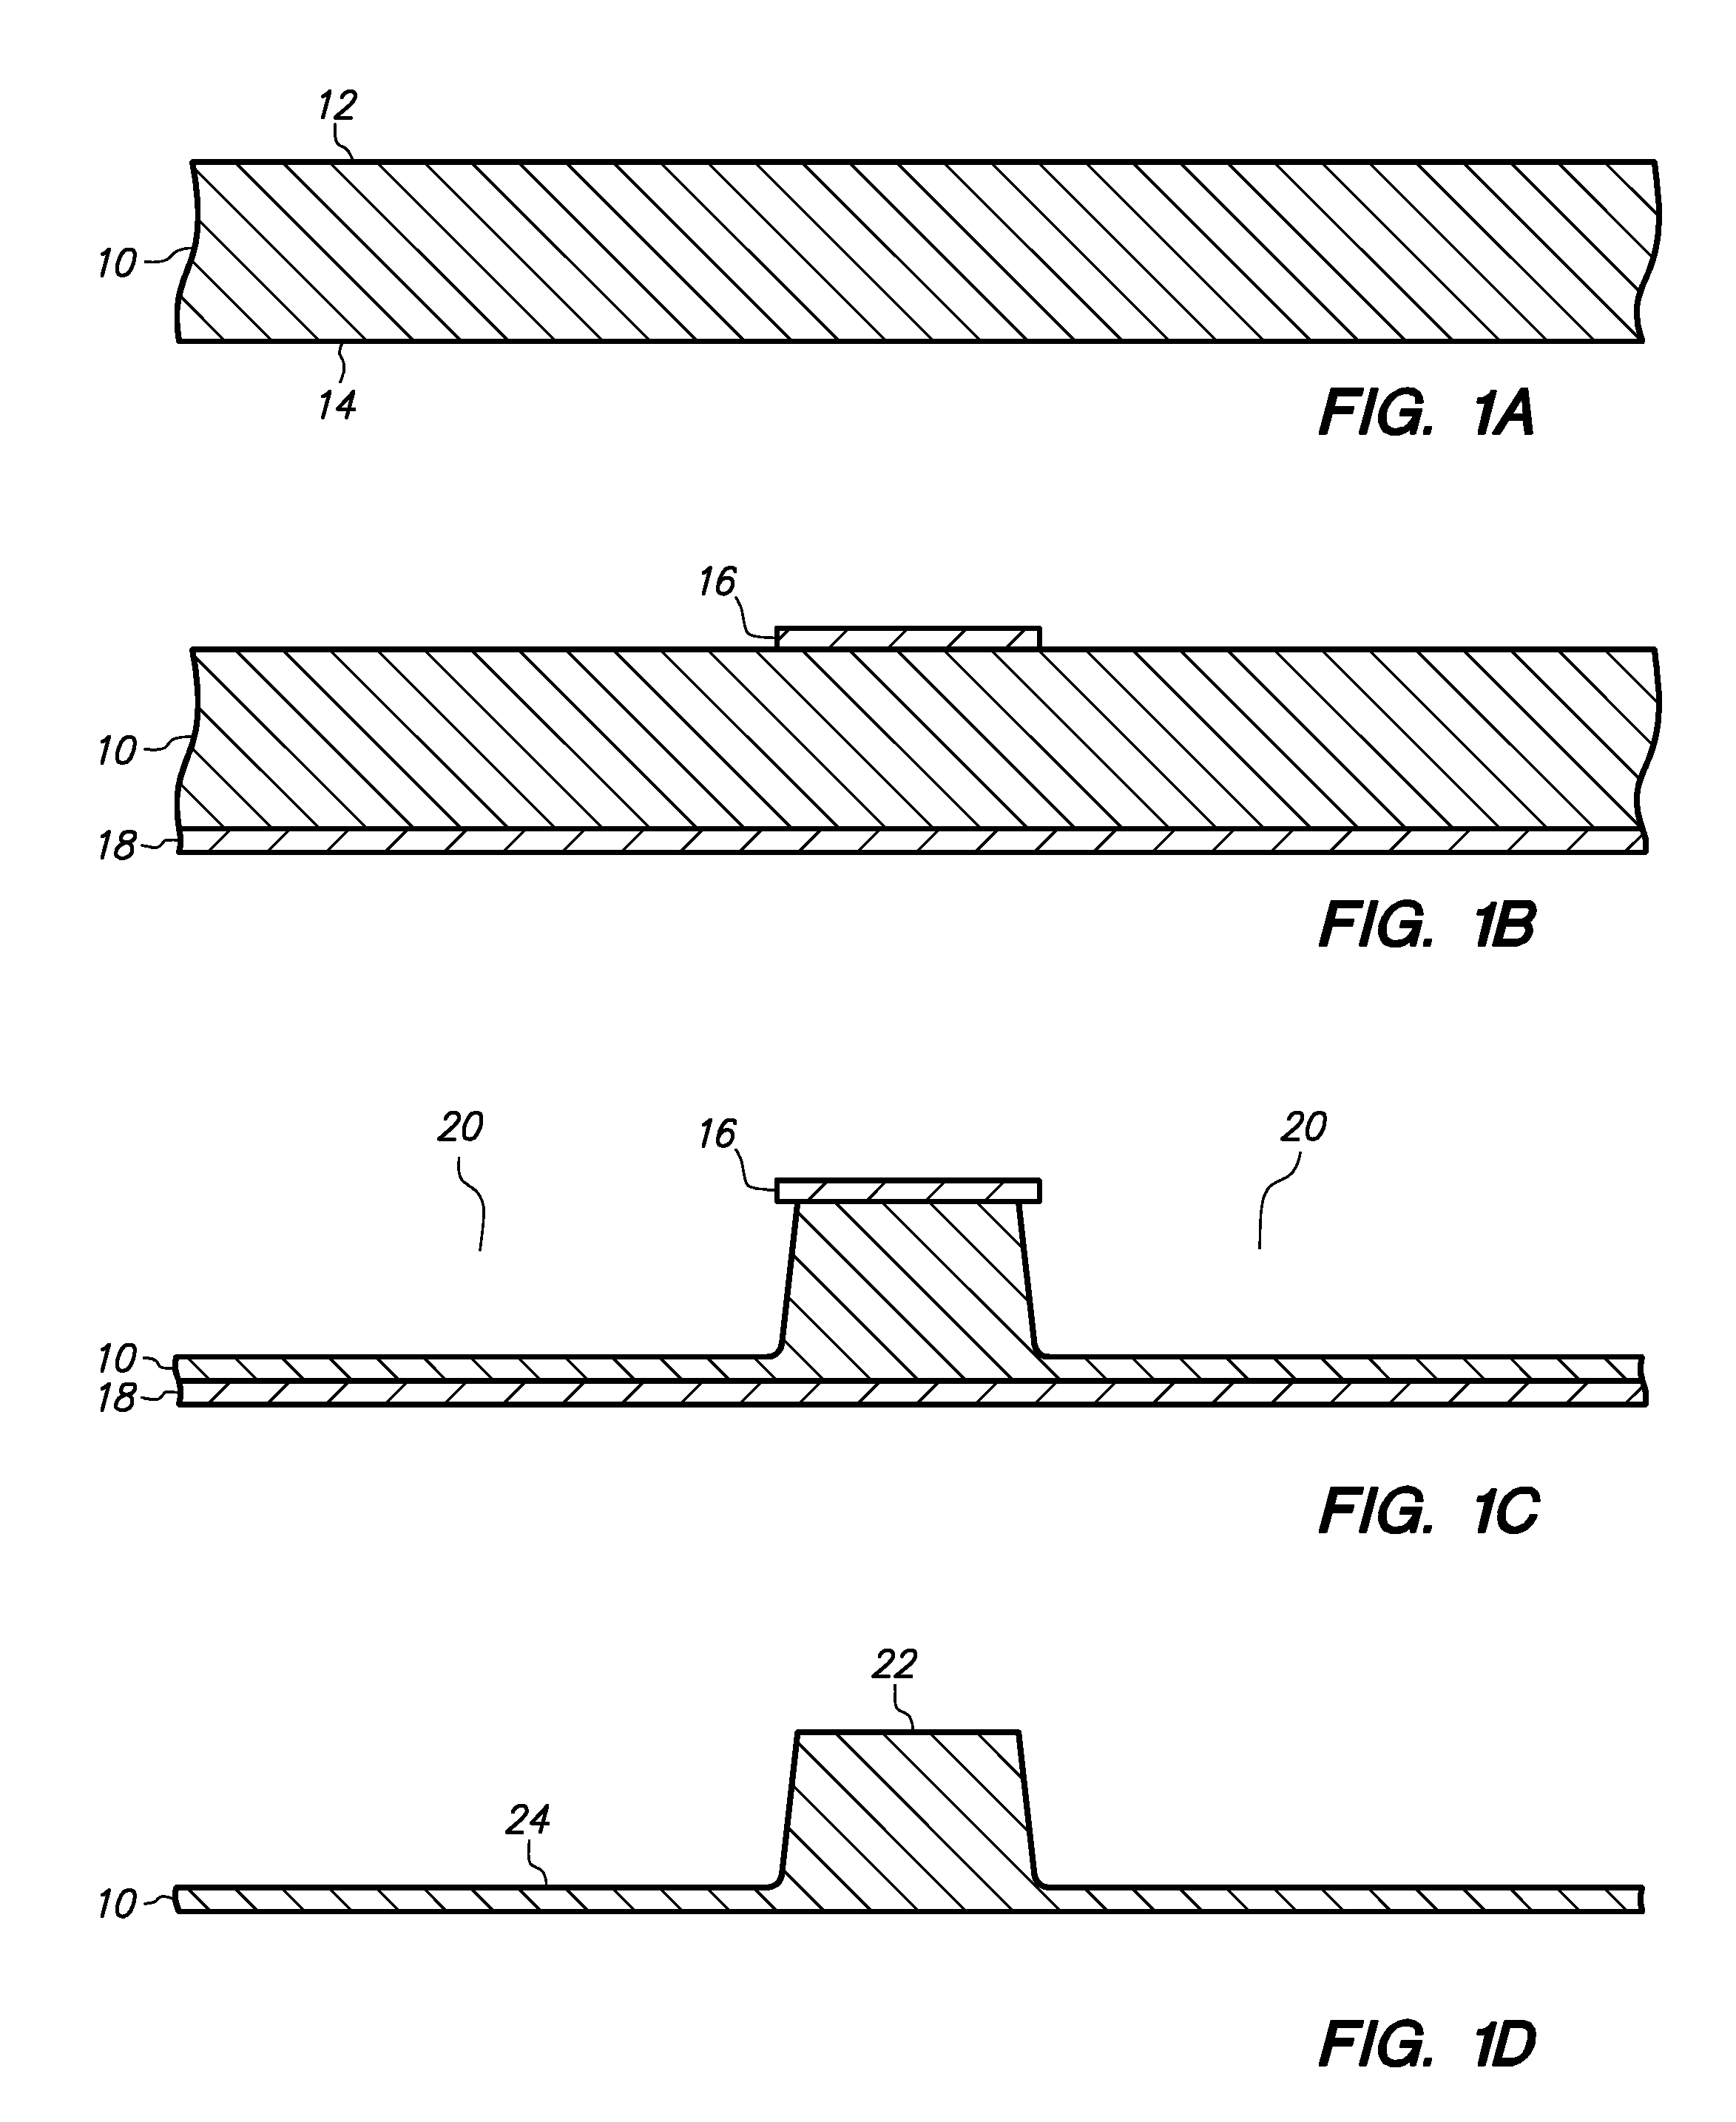 Method of making a semiconductor chip assembly with a post/base heat spreader and a plated through-hole